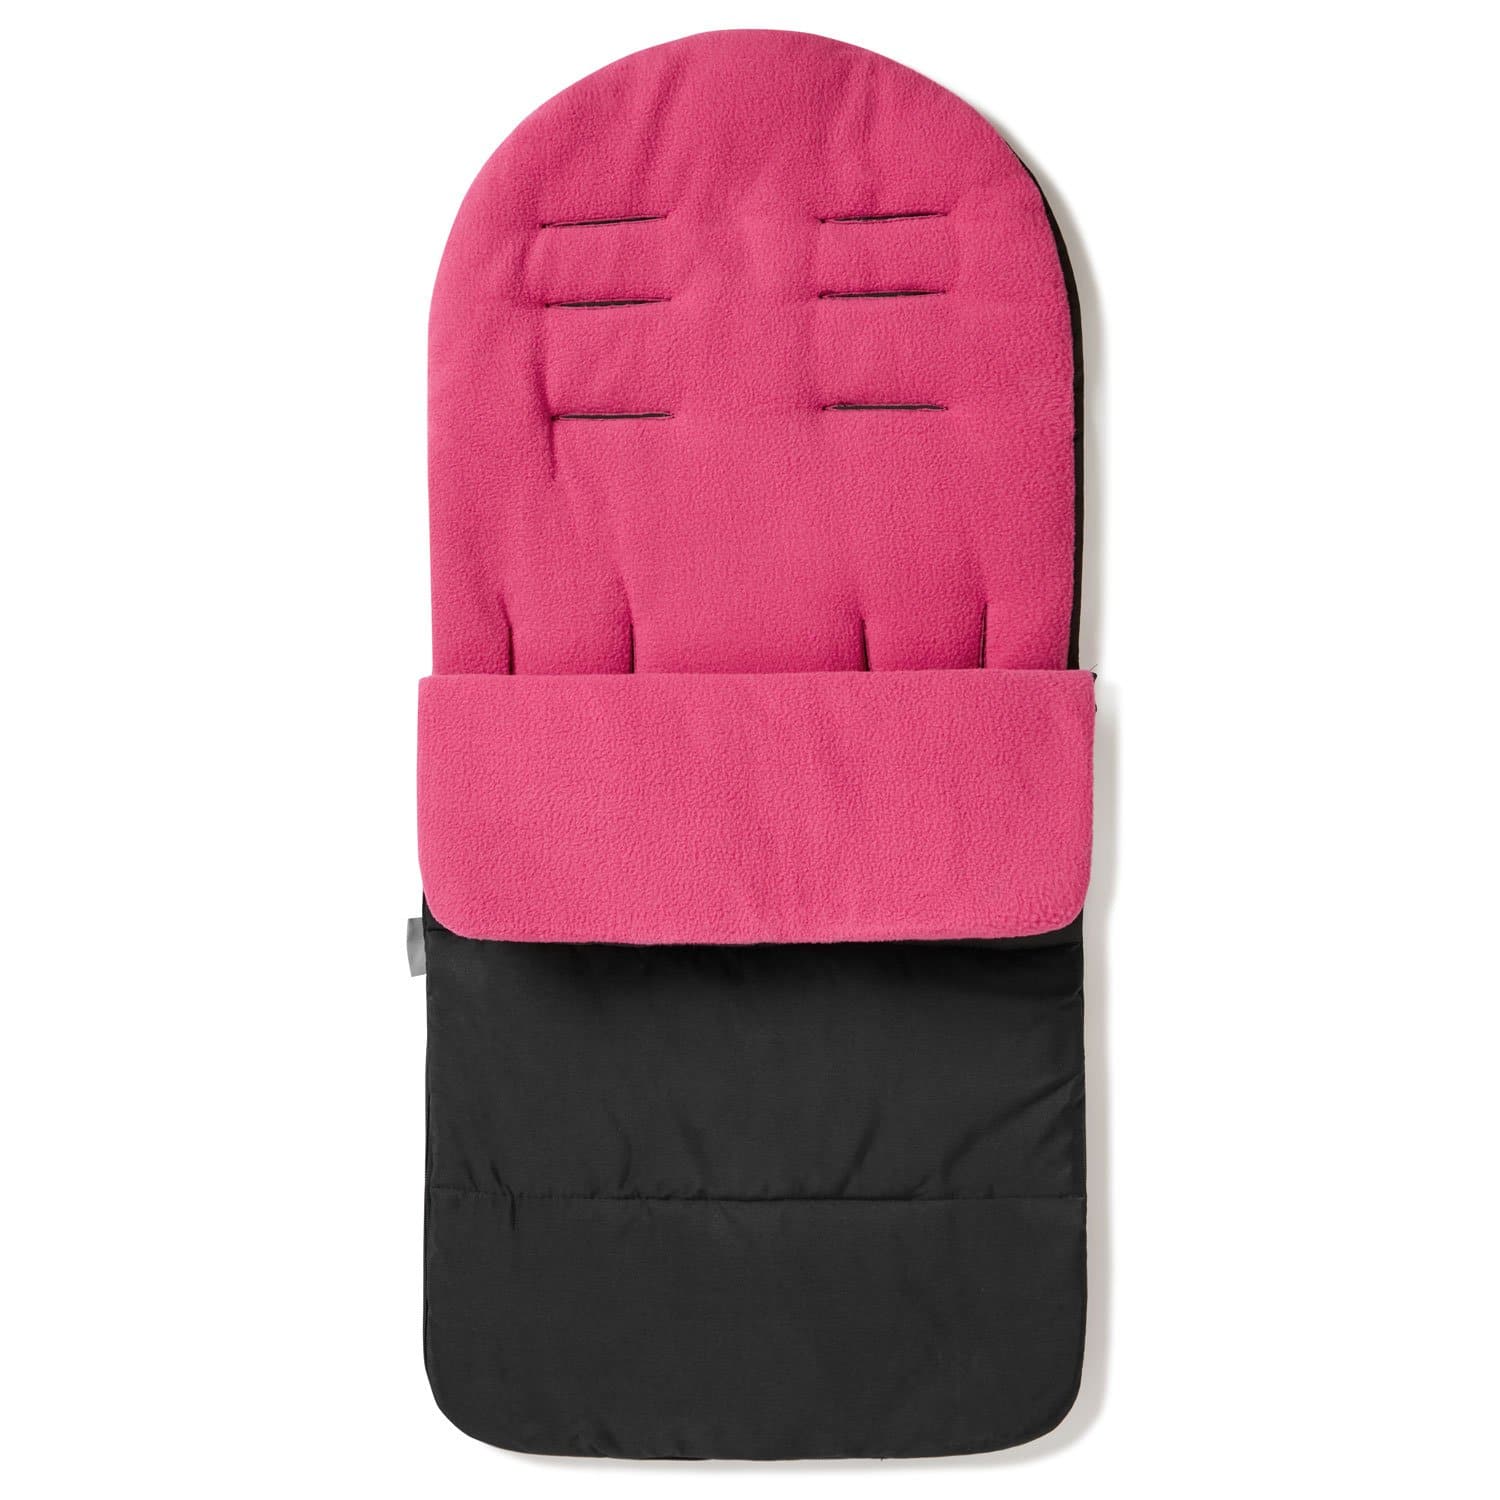 Premium Footmuff / Cosy Toes Compatible with I'coo - Pink Rose / Fits All Models | For Your Little One